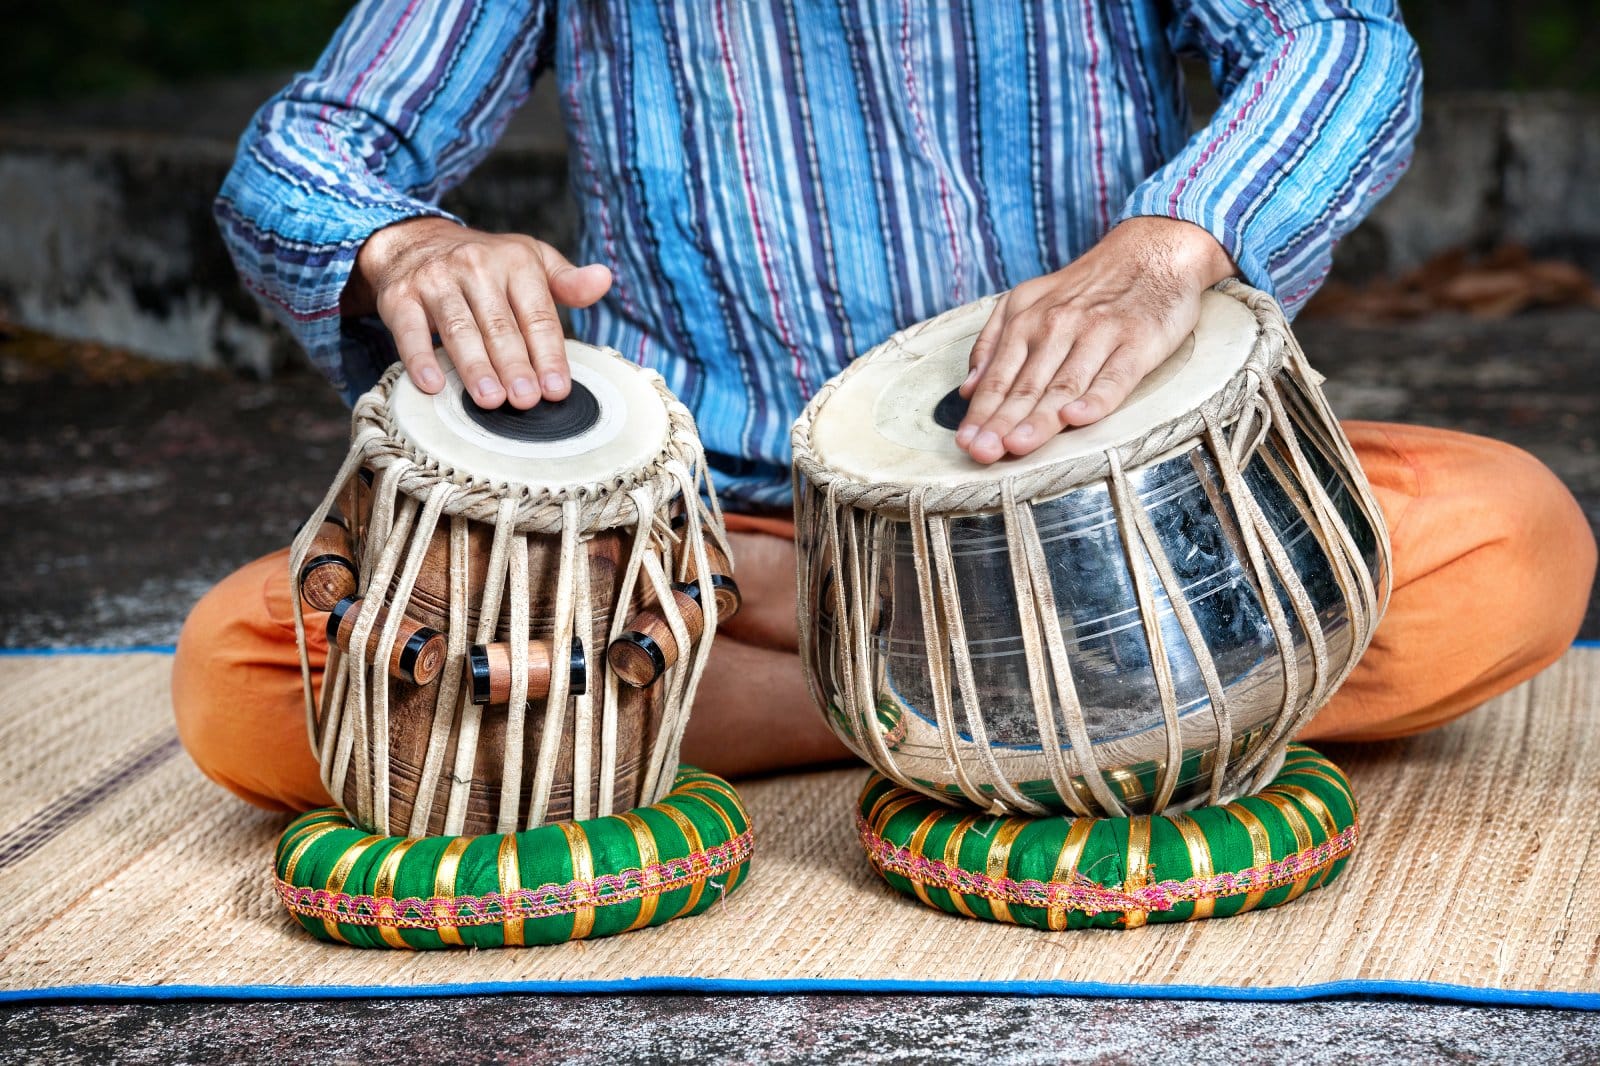 Image Credit: Shutterstock / Pikoso.kz <p><span>Music is another area where cultural appropriation is often debated. Artists sometimes adopt musical styles or instruments from other cultures, sparking discussions about originality and respect.</span></p>